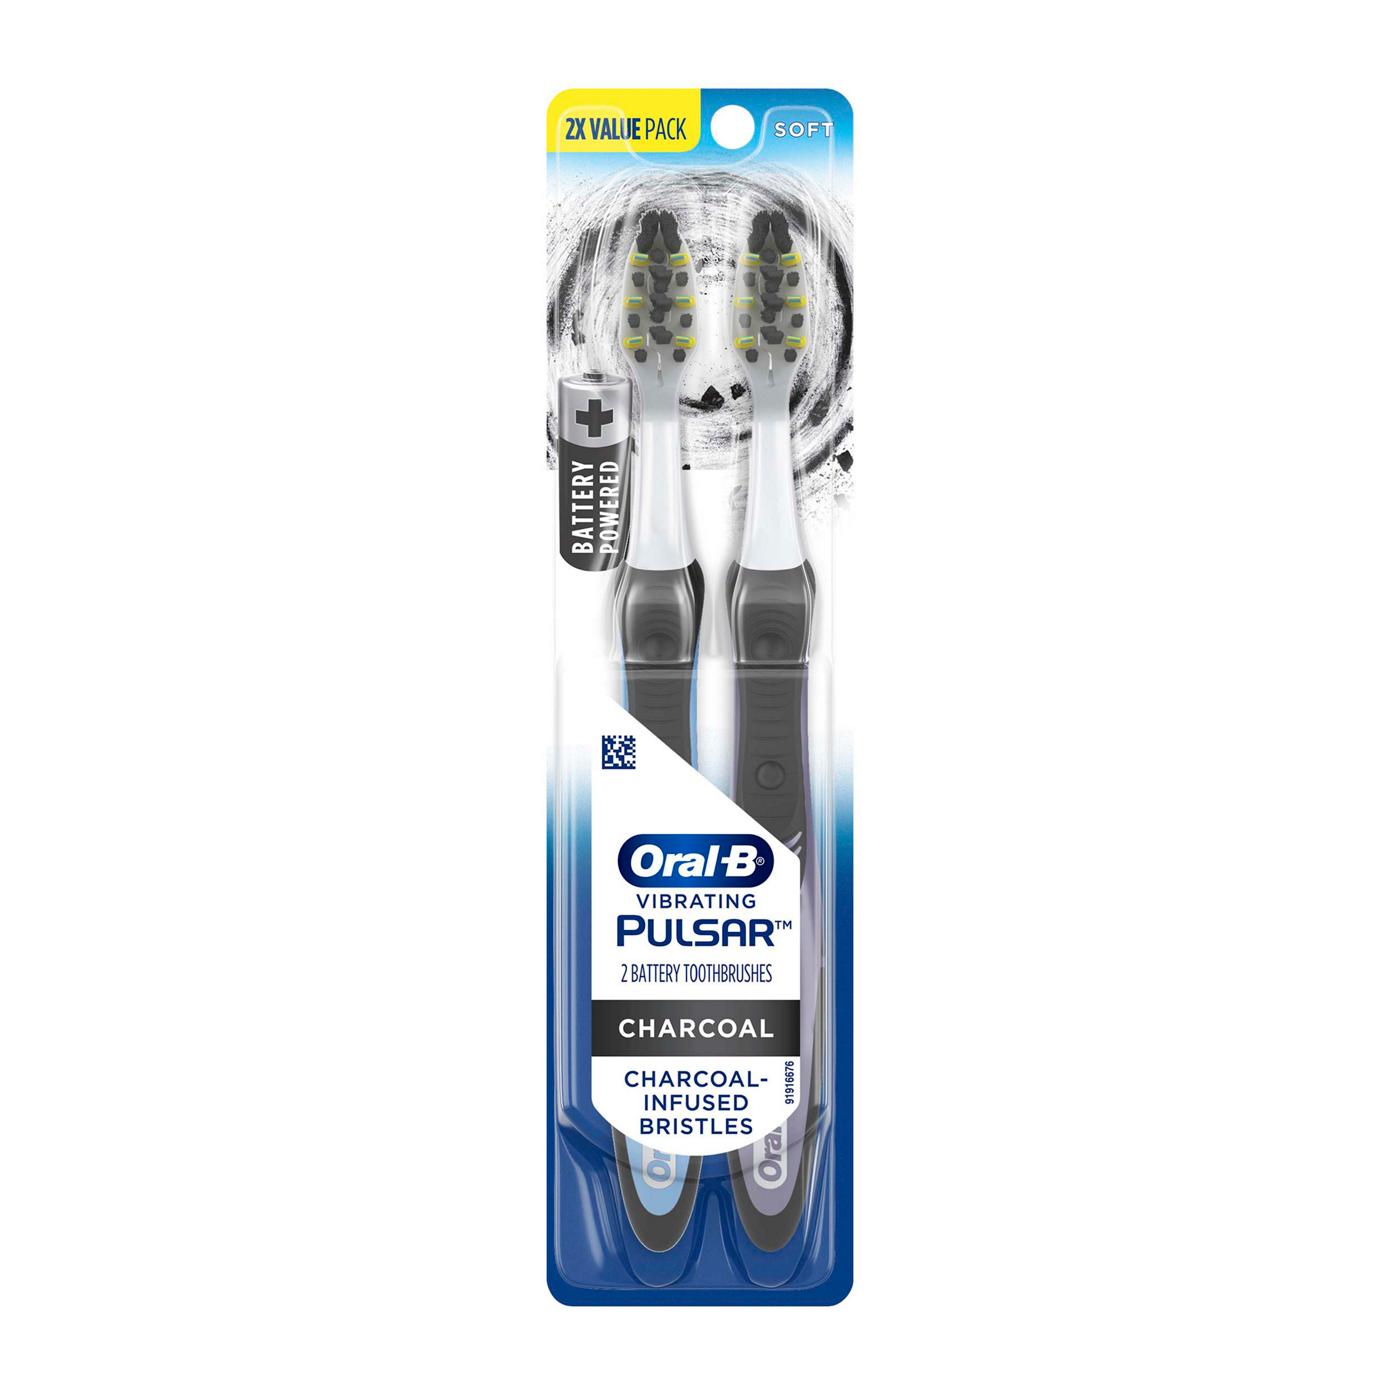 Oral-B Pulsar Charcoal Infused Battery Powered Soft Toothbrush; image 1 of 9